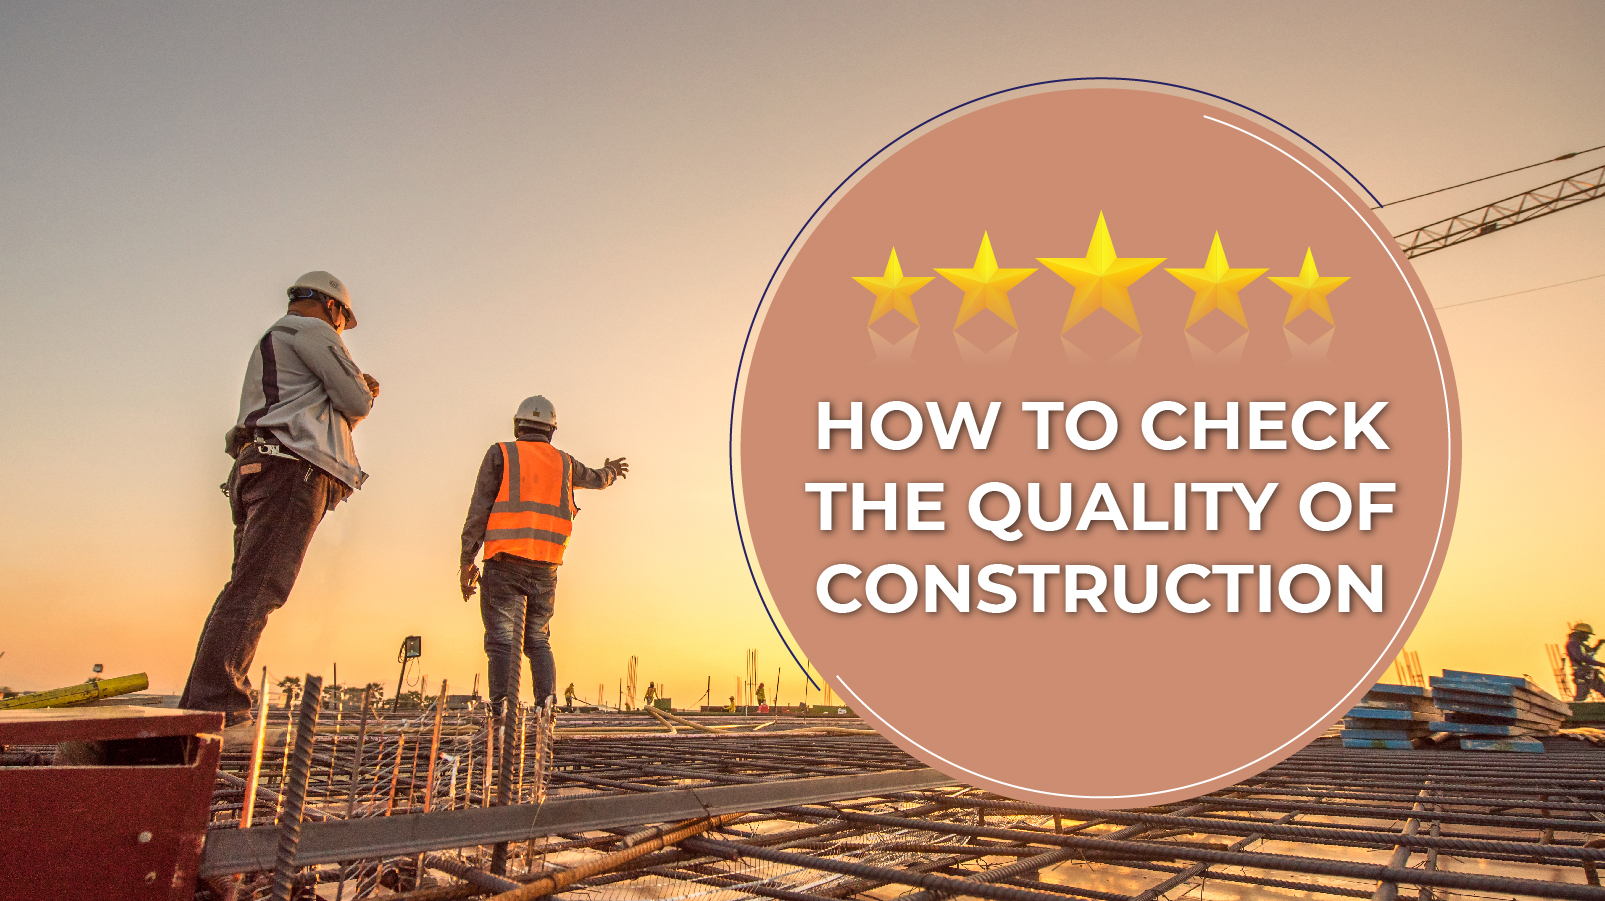 How to check the Quality of Construction